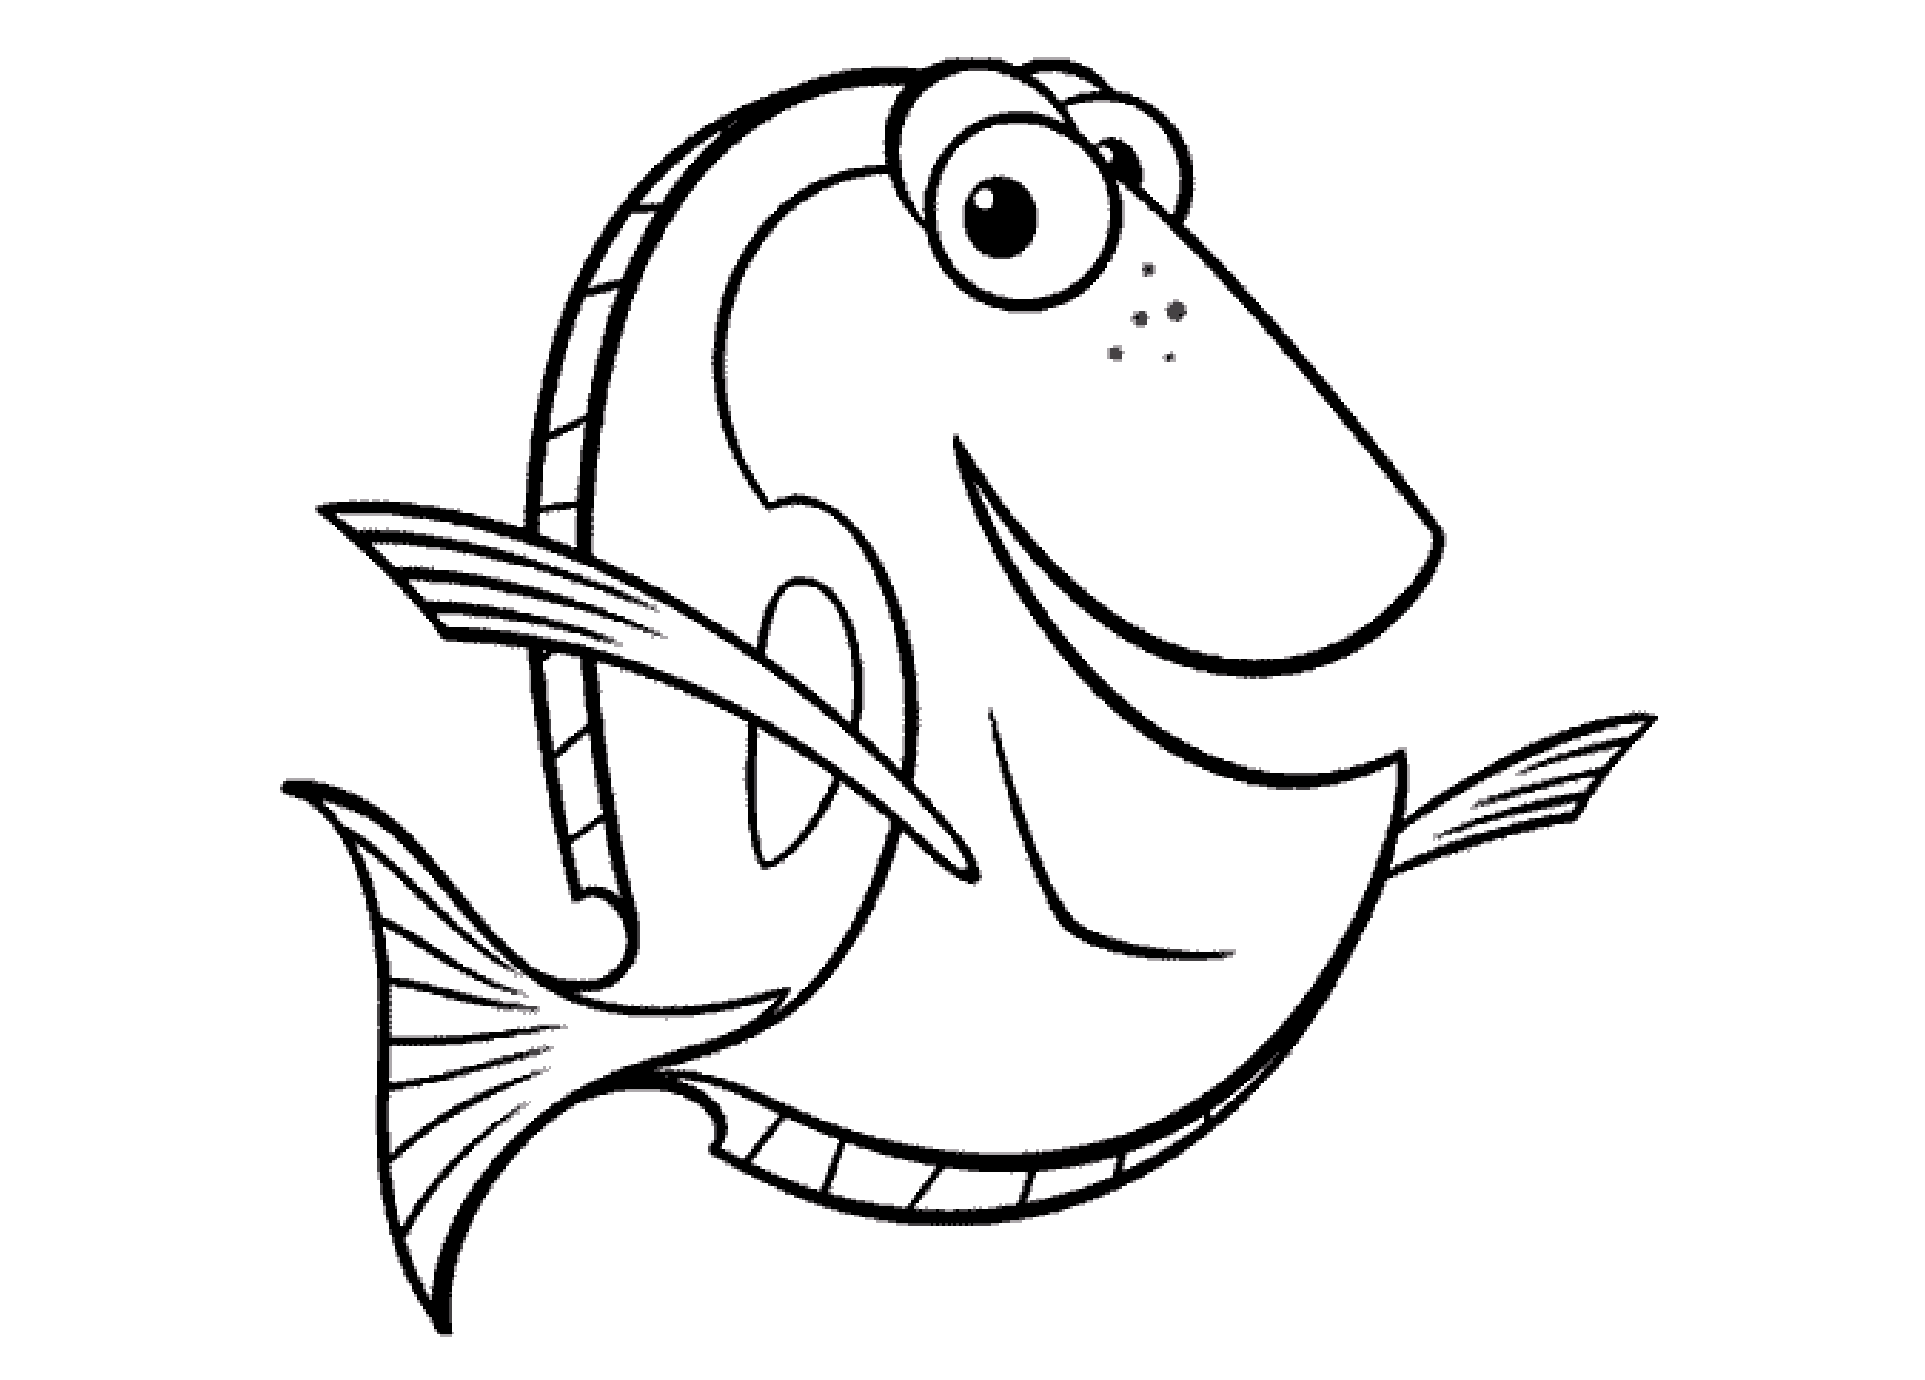 Finding dory for children - Finding Dory Kids Coloring Pages